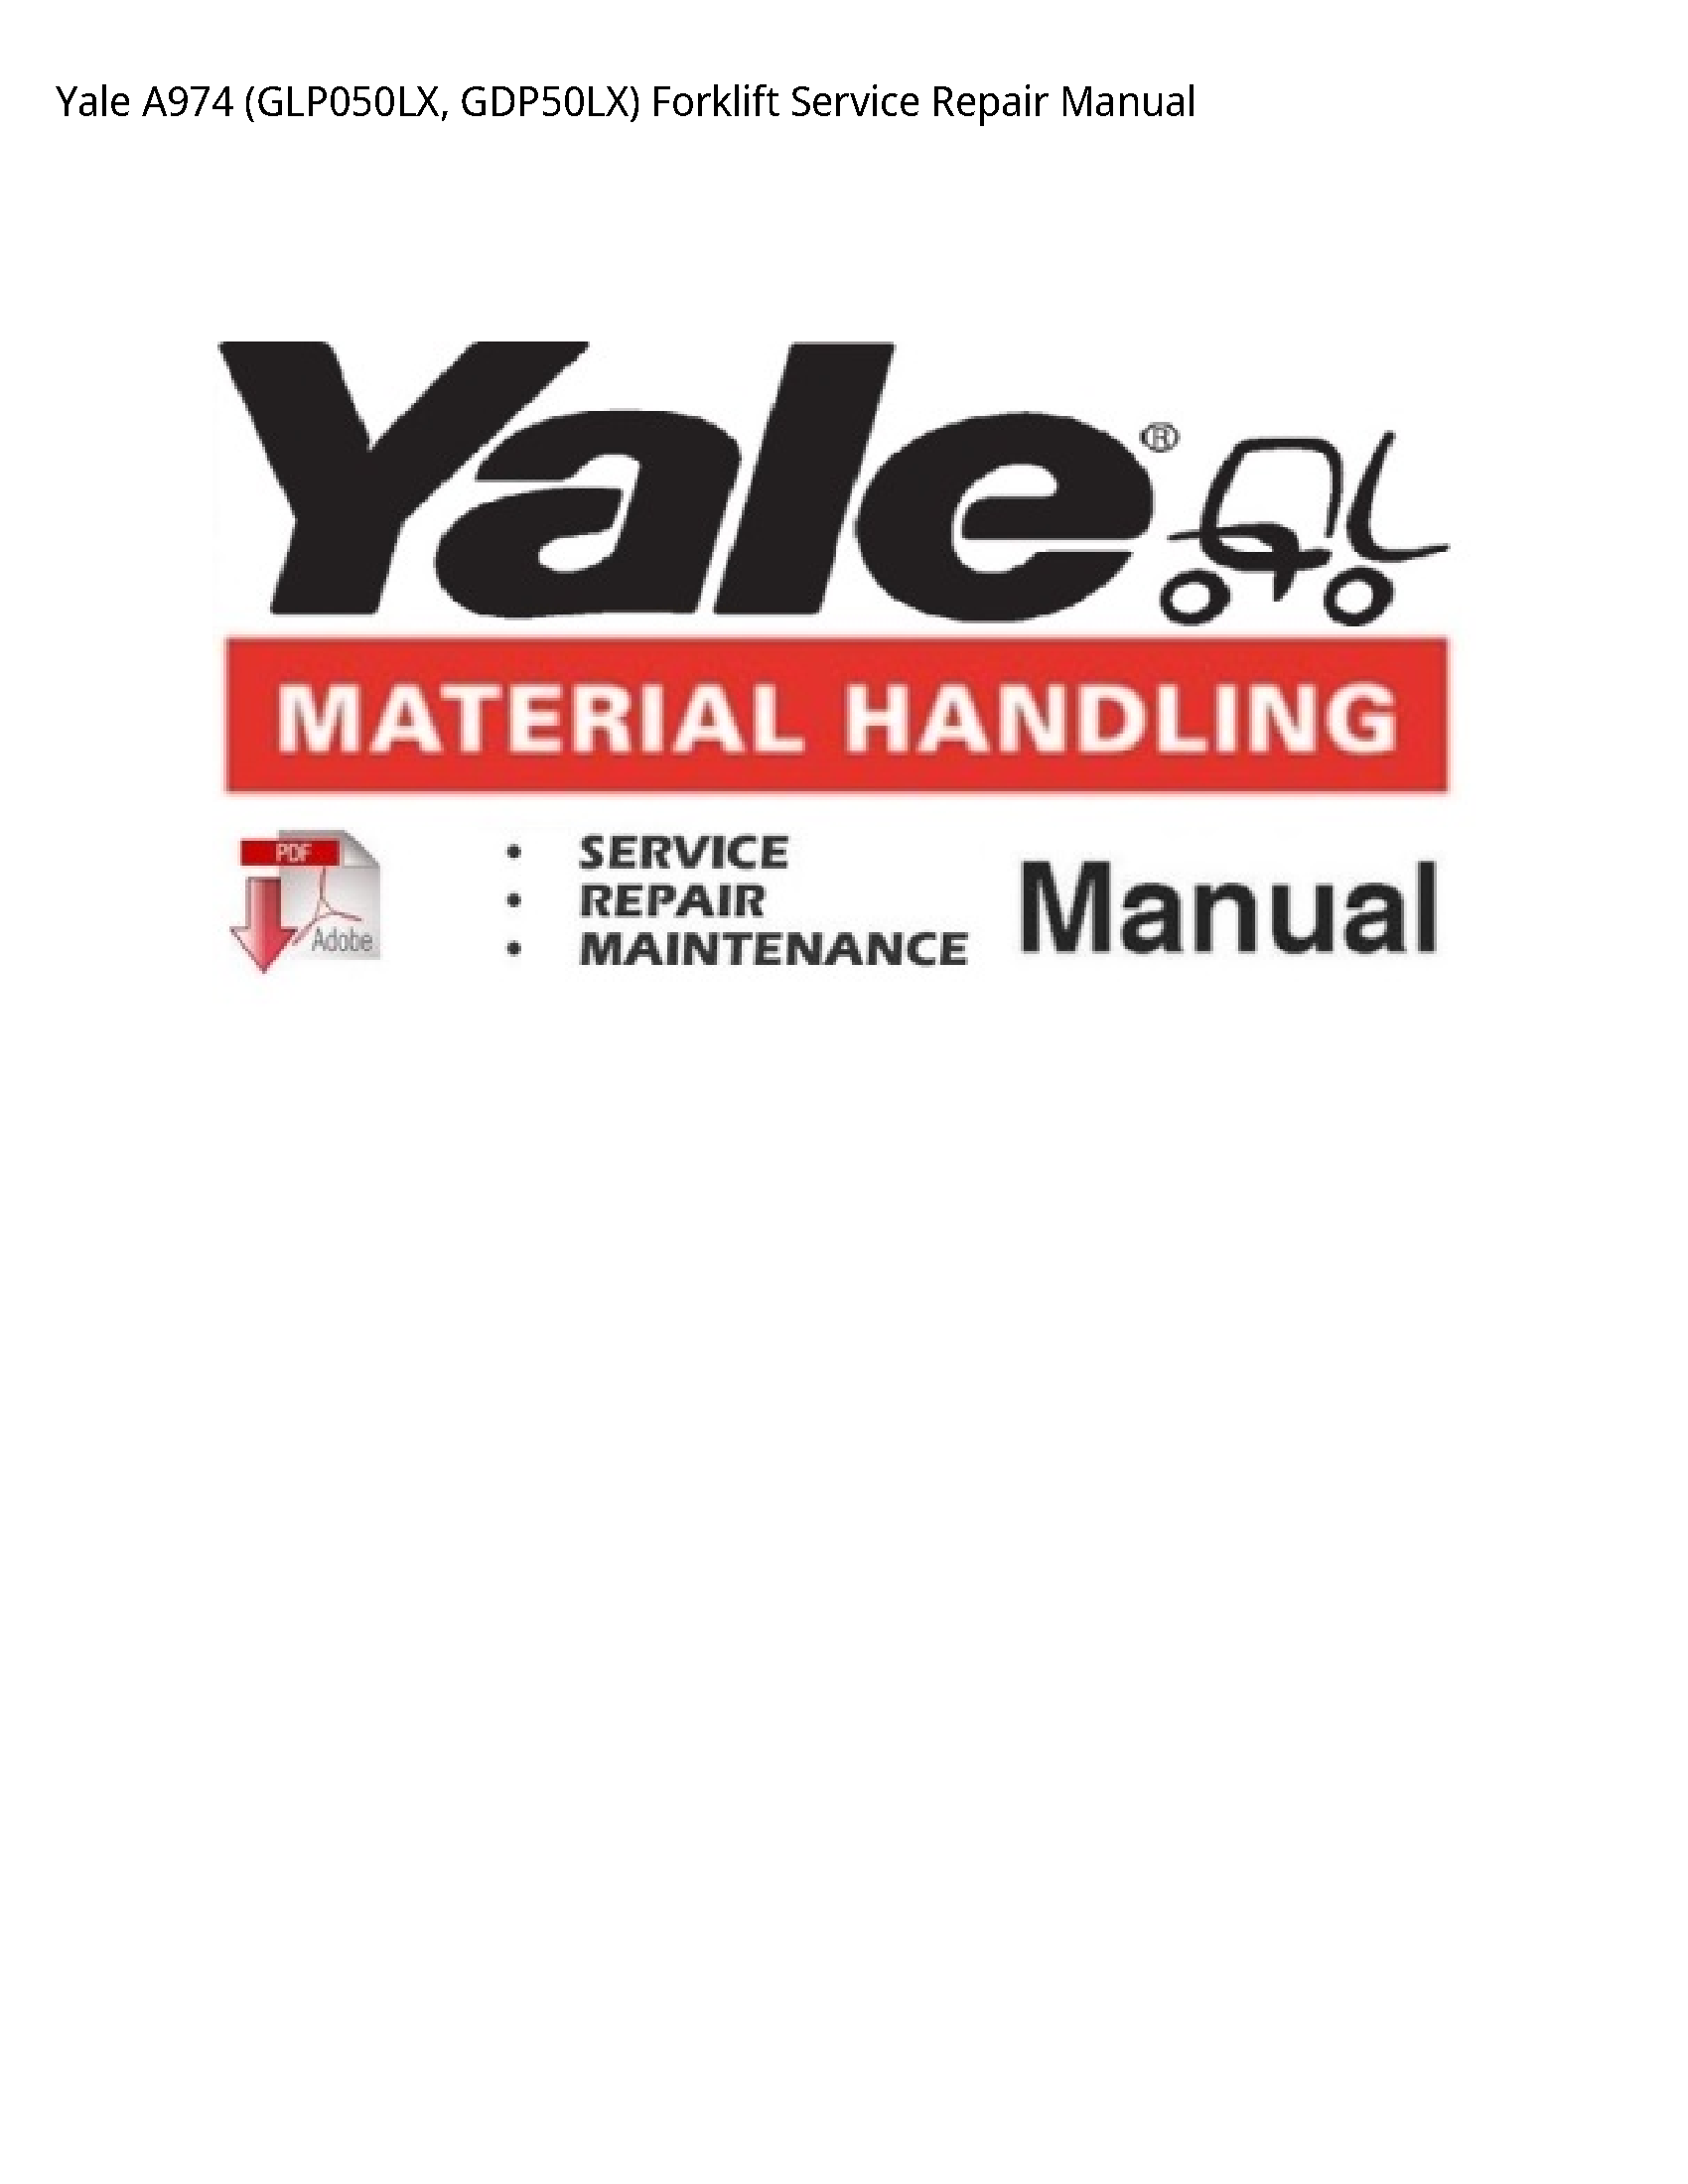 Yale A974 Forklift manual